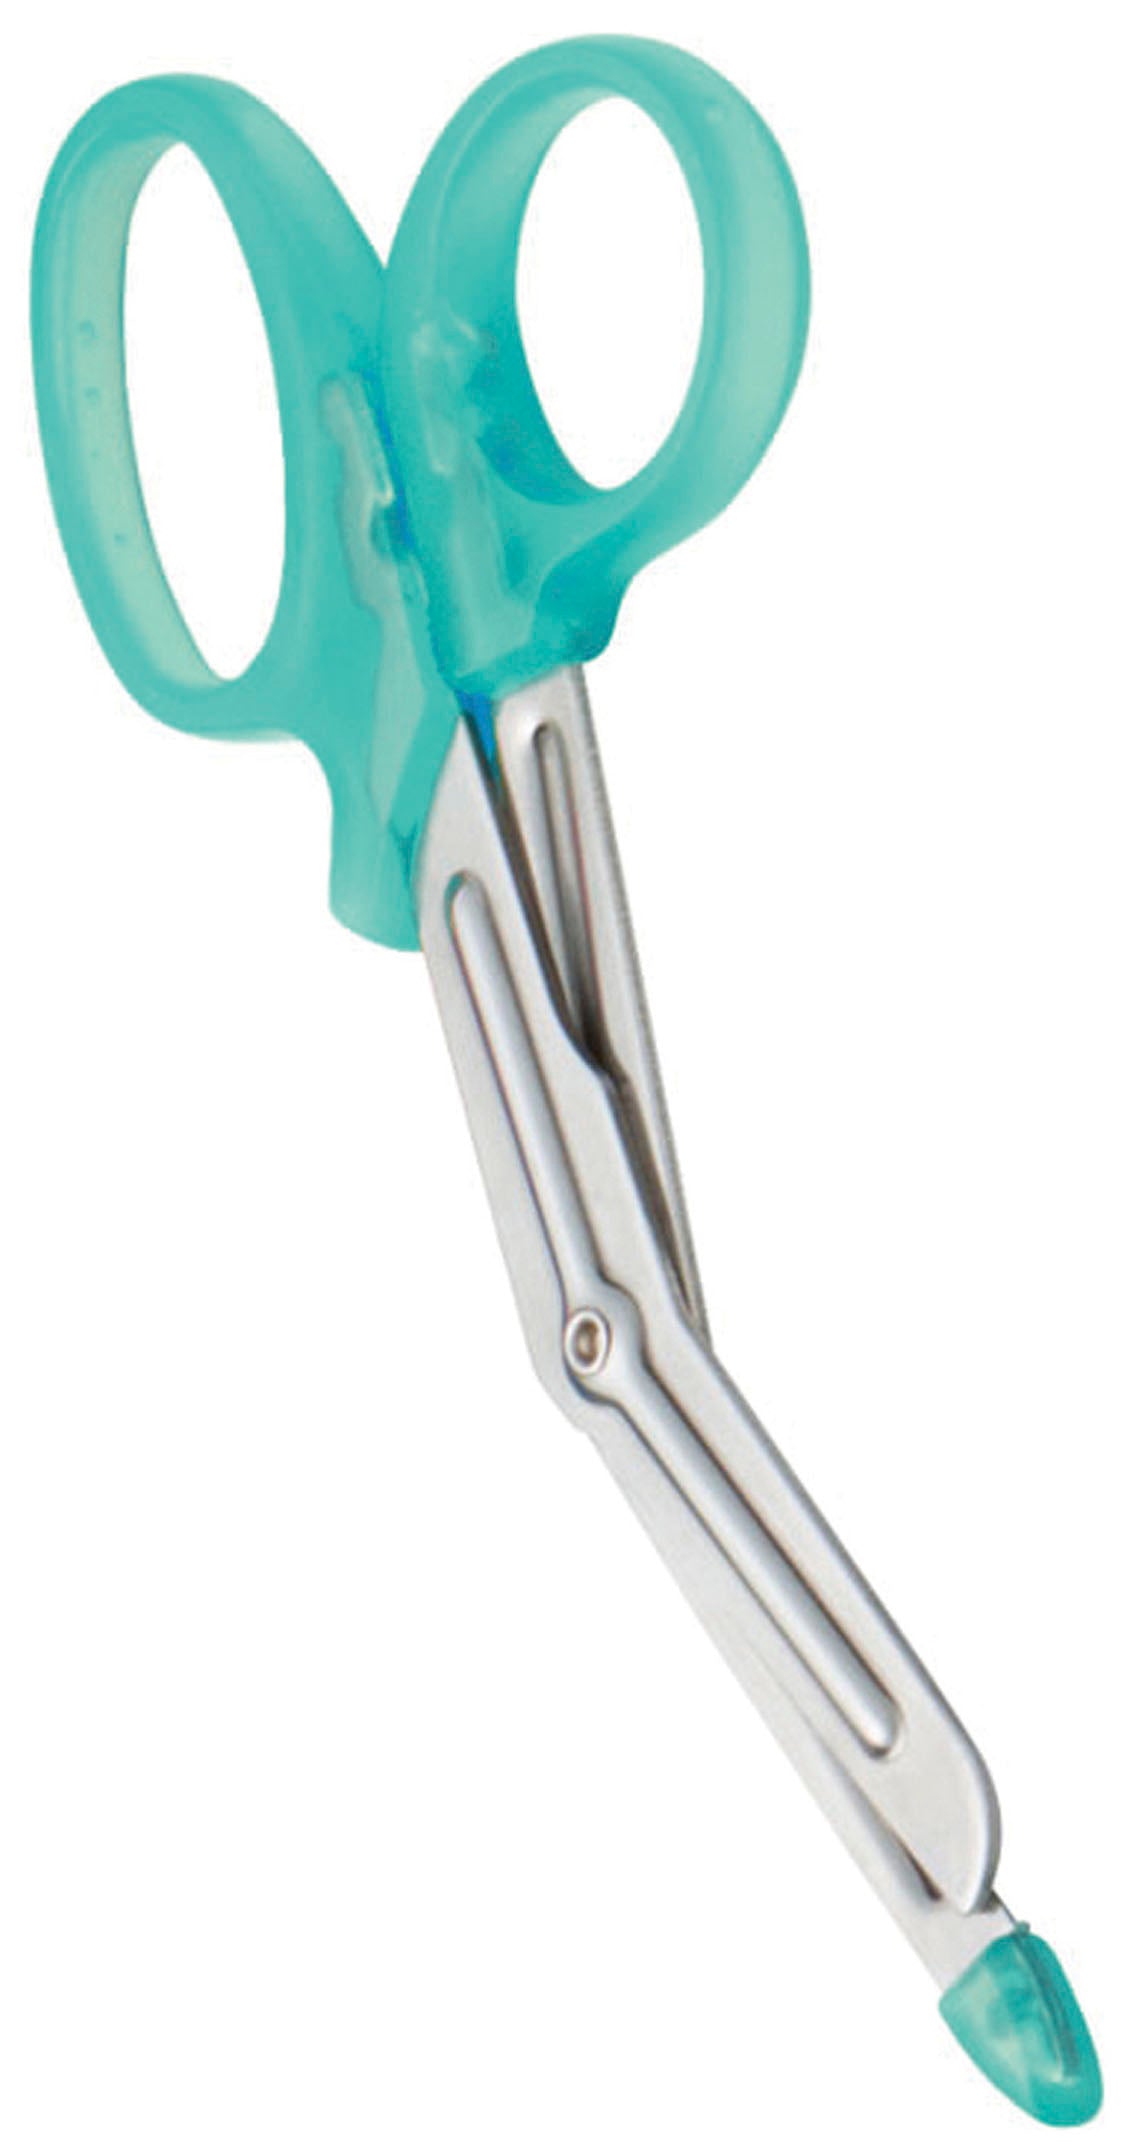 Shears 5 1/2" Bandage Scissors ADC Frosted Peacock  